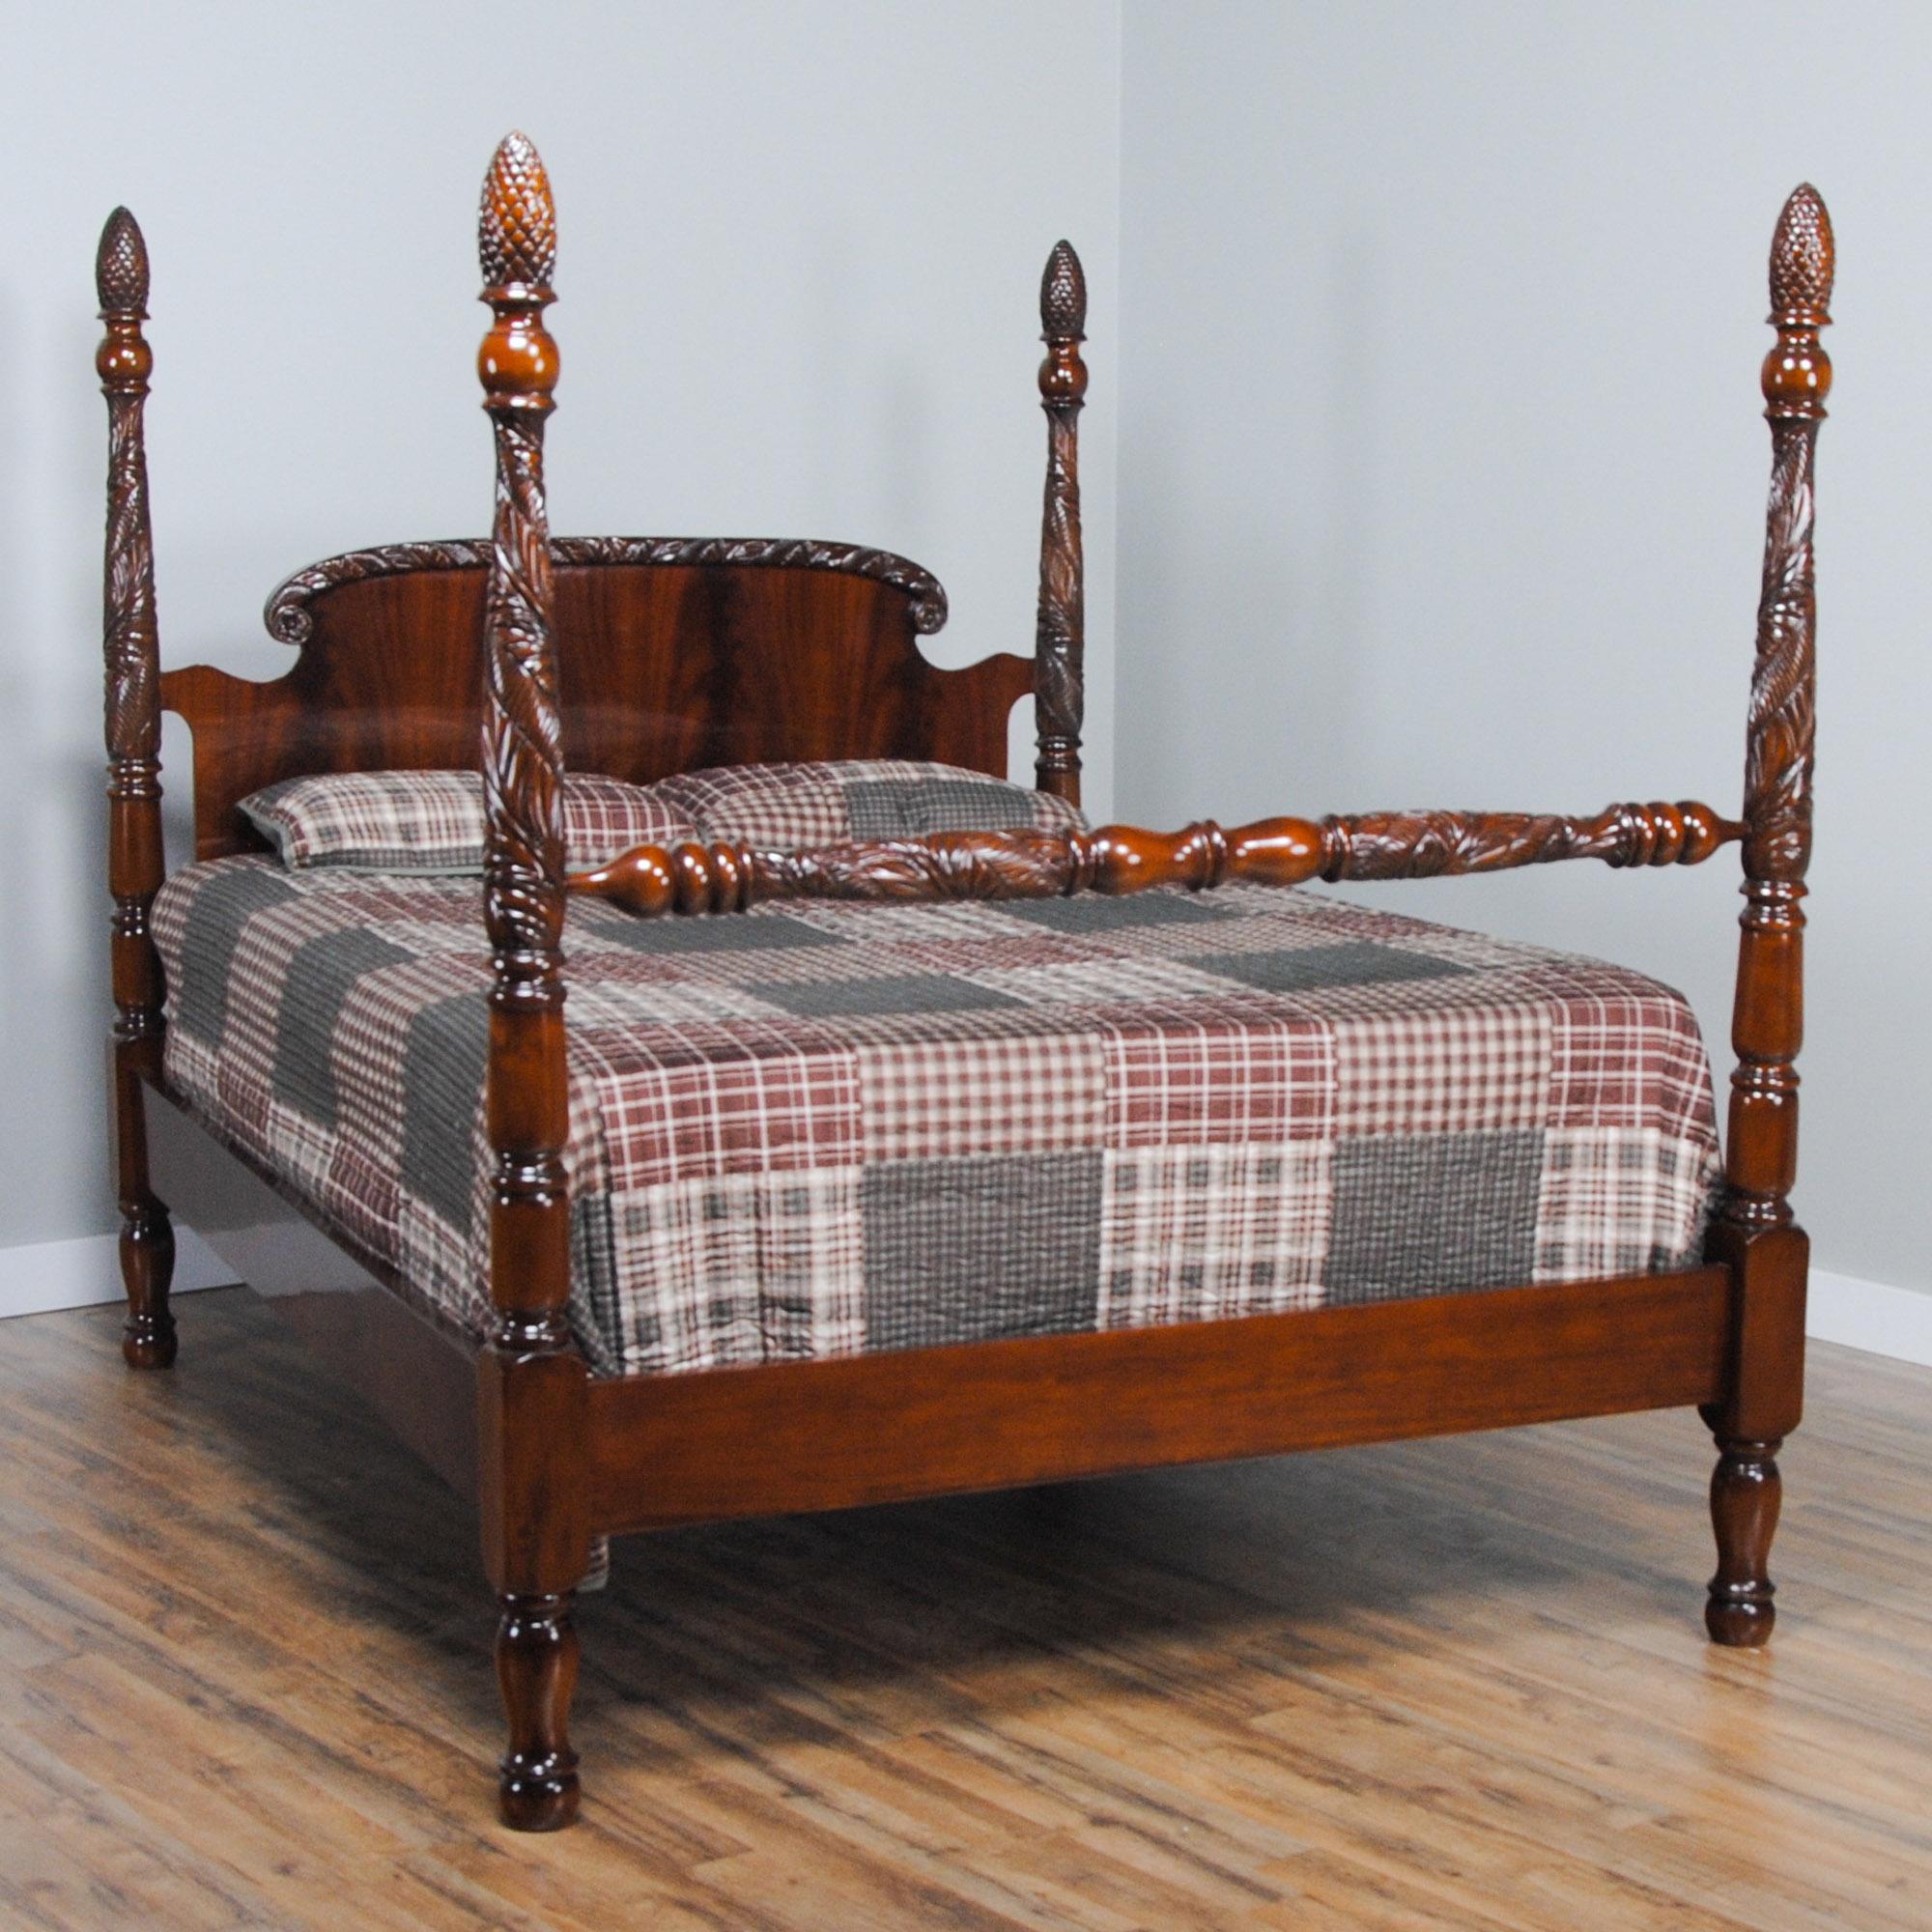 A King Size Mahogany Poster Bed. A Solid Mahogany Frame and the finest mahogany veneered headboard panel combine together to create a beautiful and elegant bed suitable to be the center of attention in any bedroom. The carved posts feature stylized